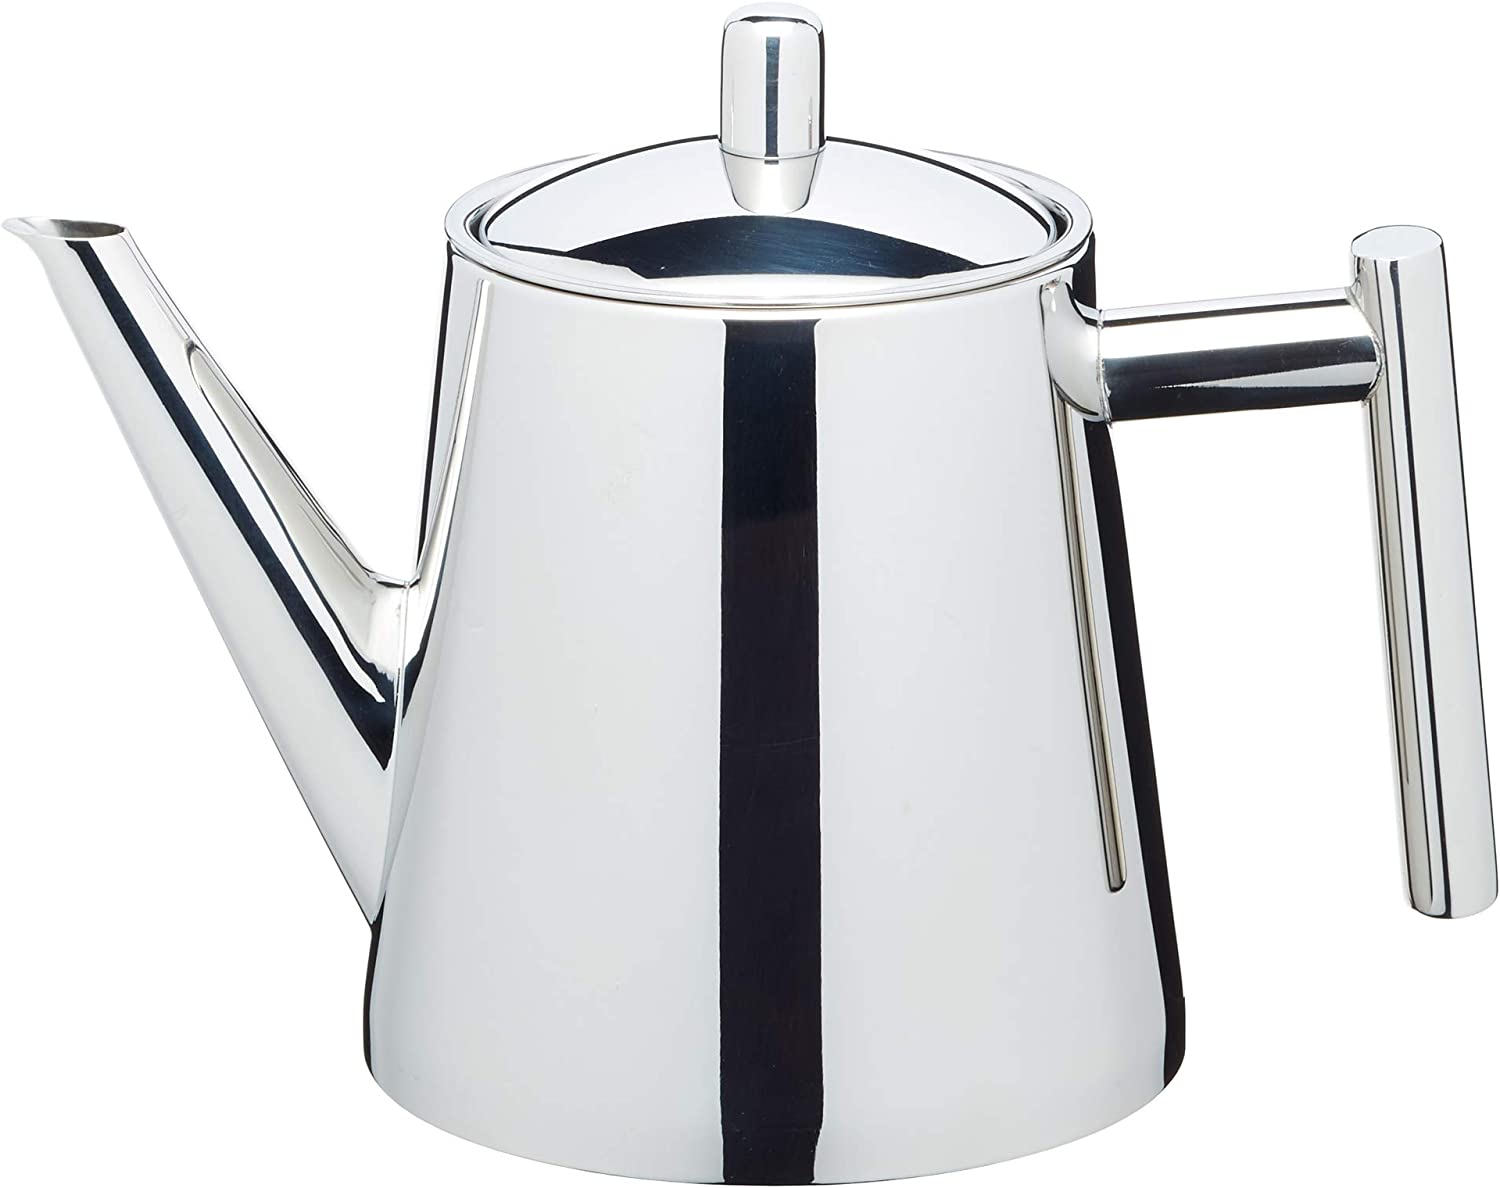 LE XPRESS Kitchen Craft 800 ml Stainless Steel Infuser Teapot, Silver